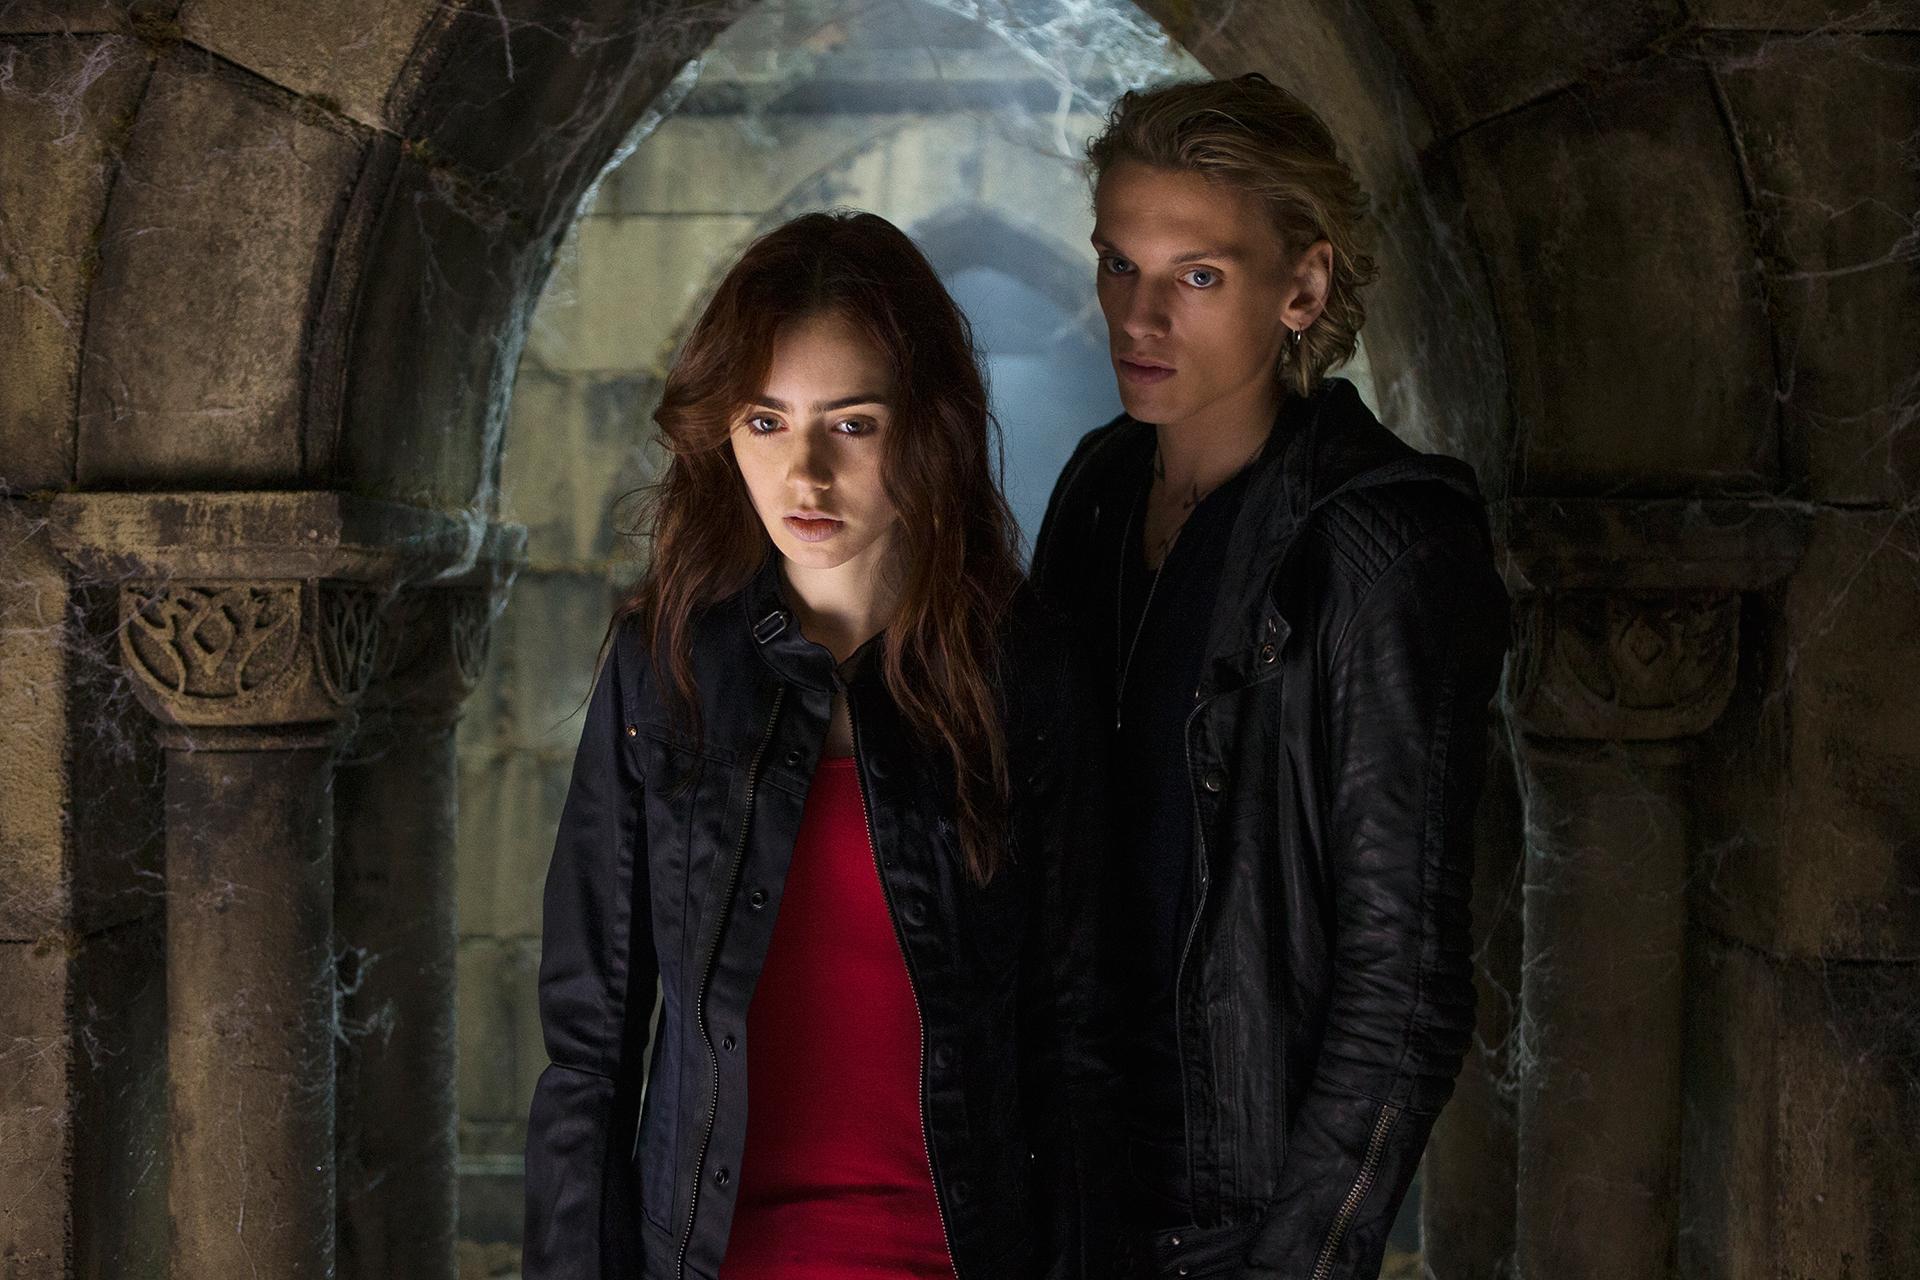 Clary Fray (Lily Collins) and Jace Wayland (Jamie Campbell Bower) in 'Mortal Instruments: City of Bones'